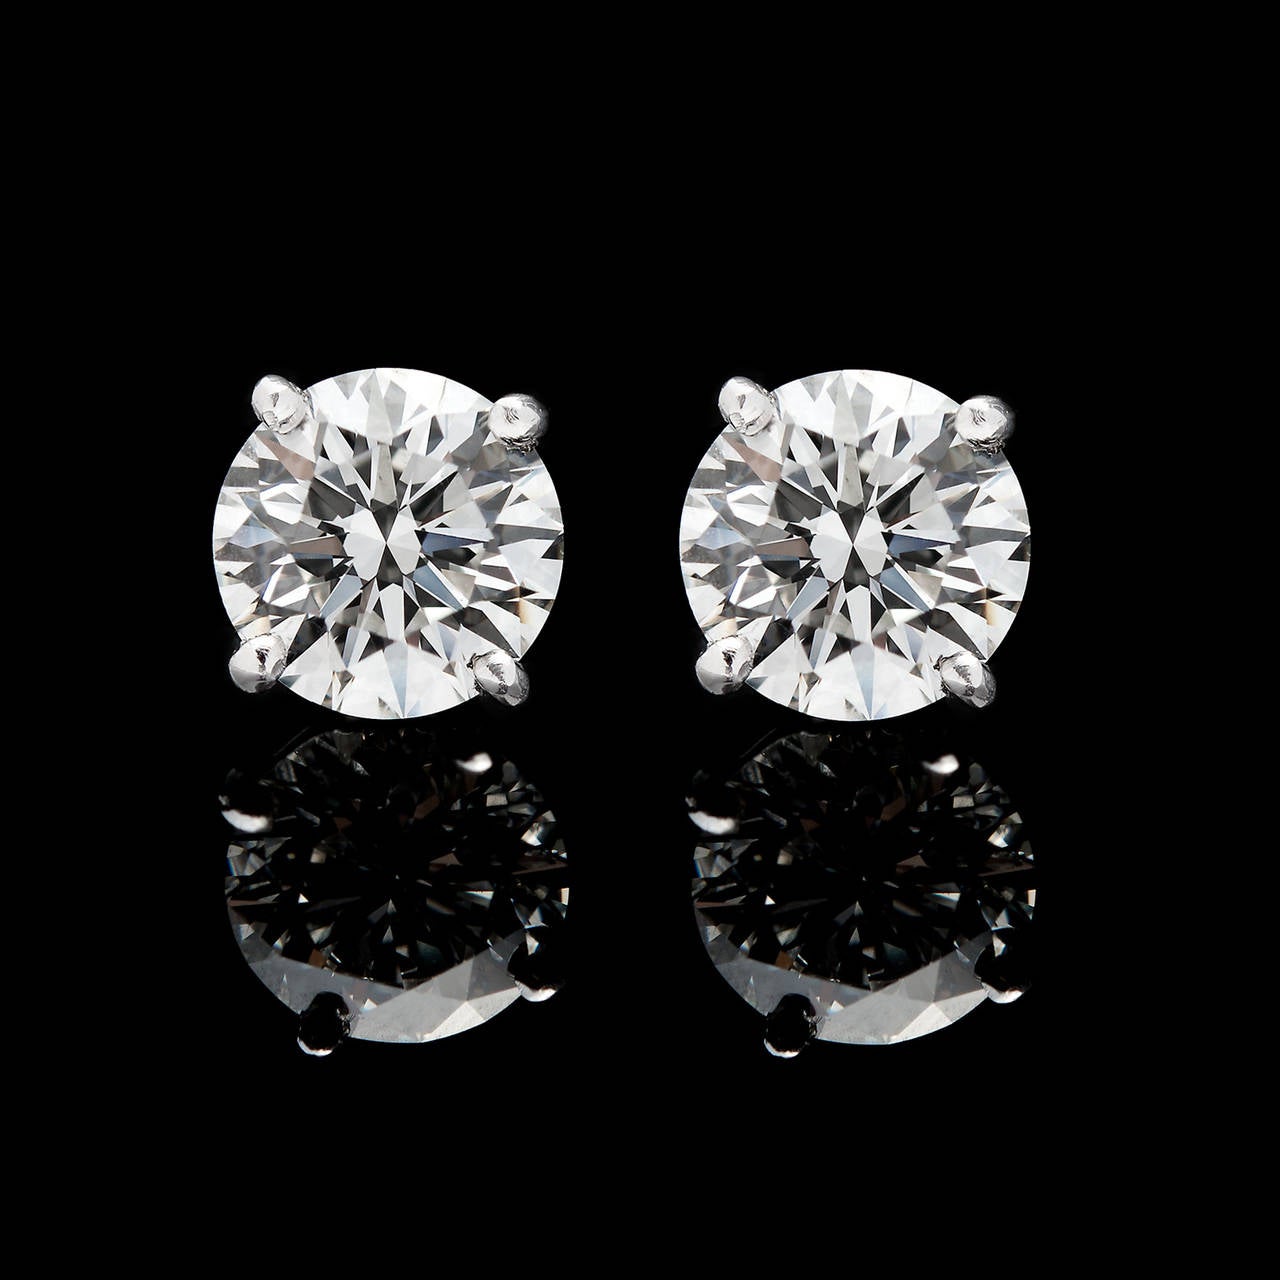 2.43 Carat Total Weight Round Brilliant Cut Diamond Studs with F & G Color and VVS2 & VS2 Clarity, Set in Platinum. The earrings measure approximately 7mm in diameter and weigh 2.6 grams combined. They come complete with GIA reports 2155284681 &